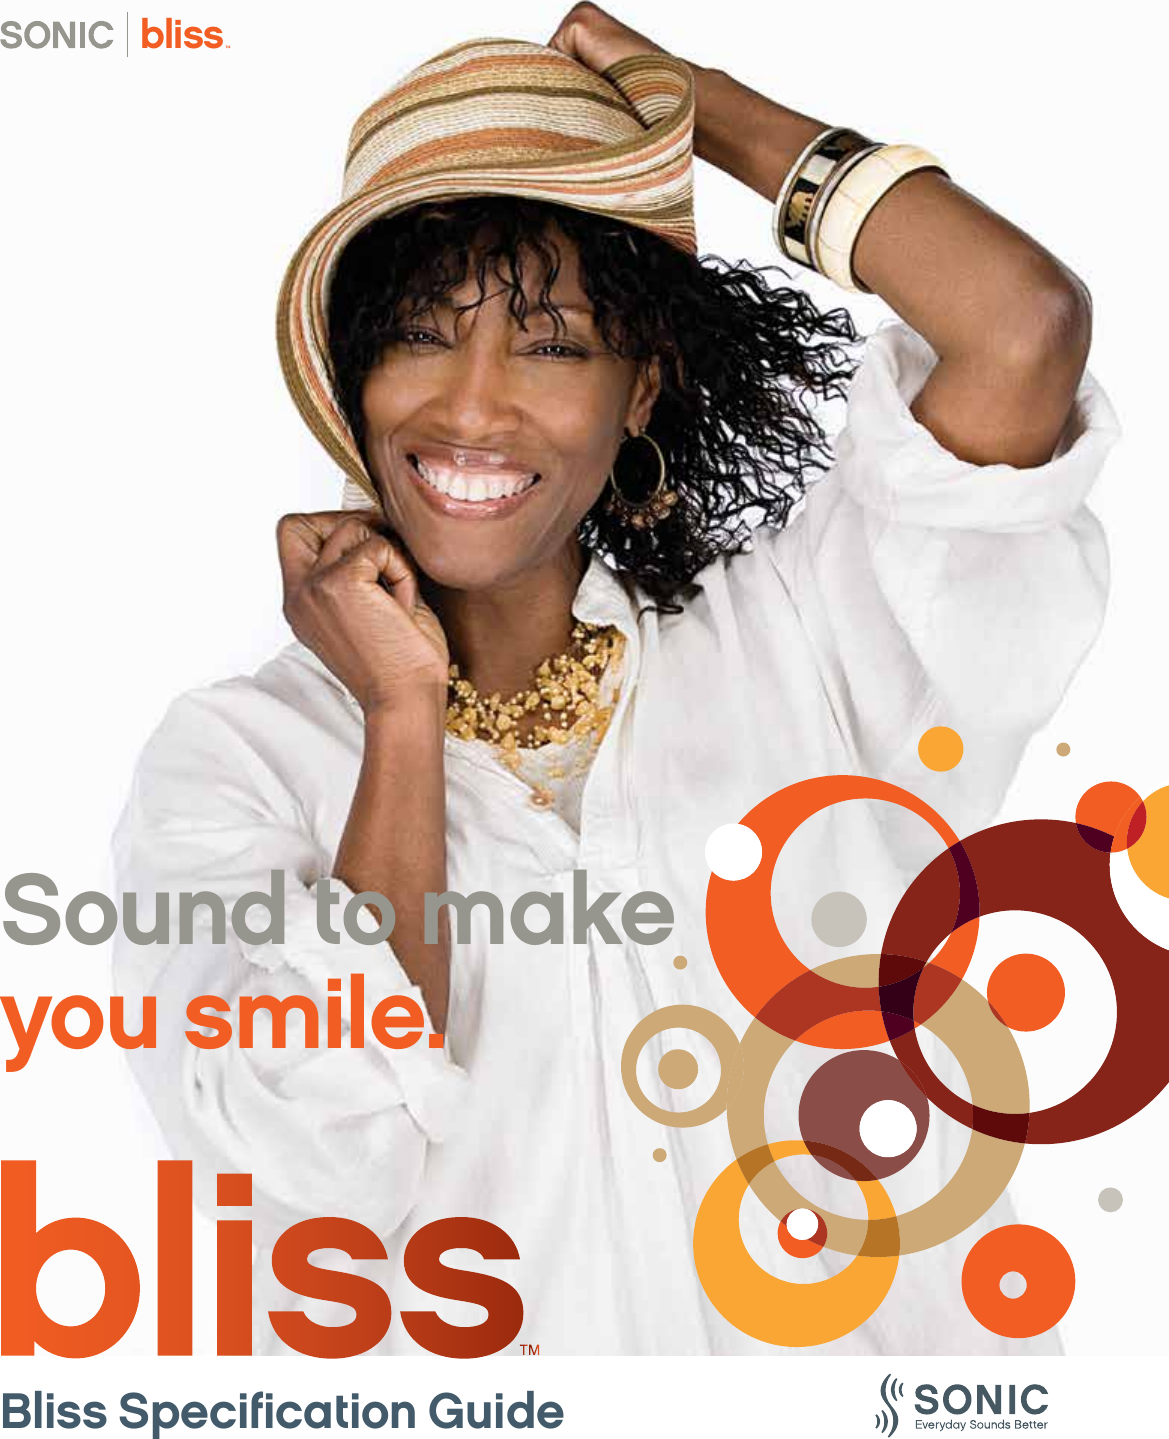 blissblissBliss Specification GuideSound to makeyou smile.